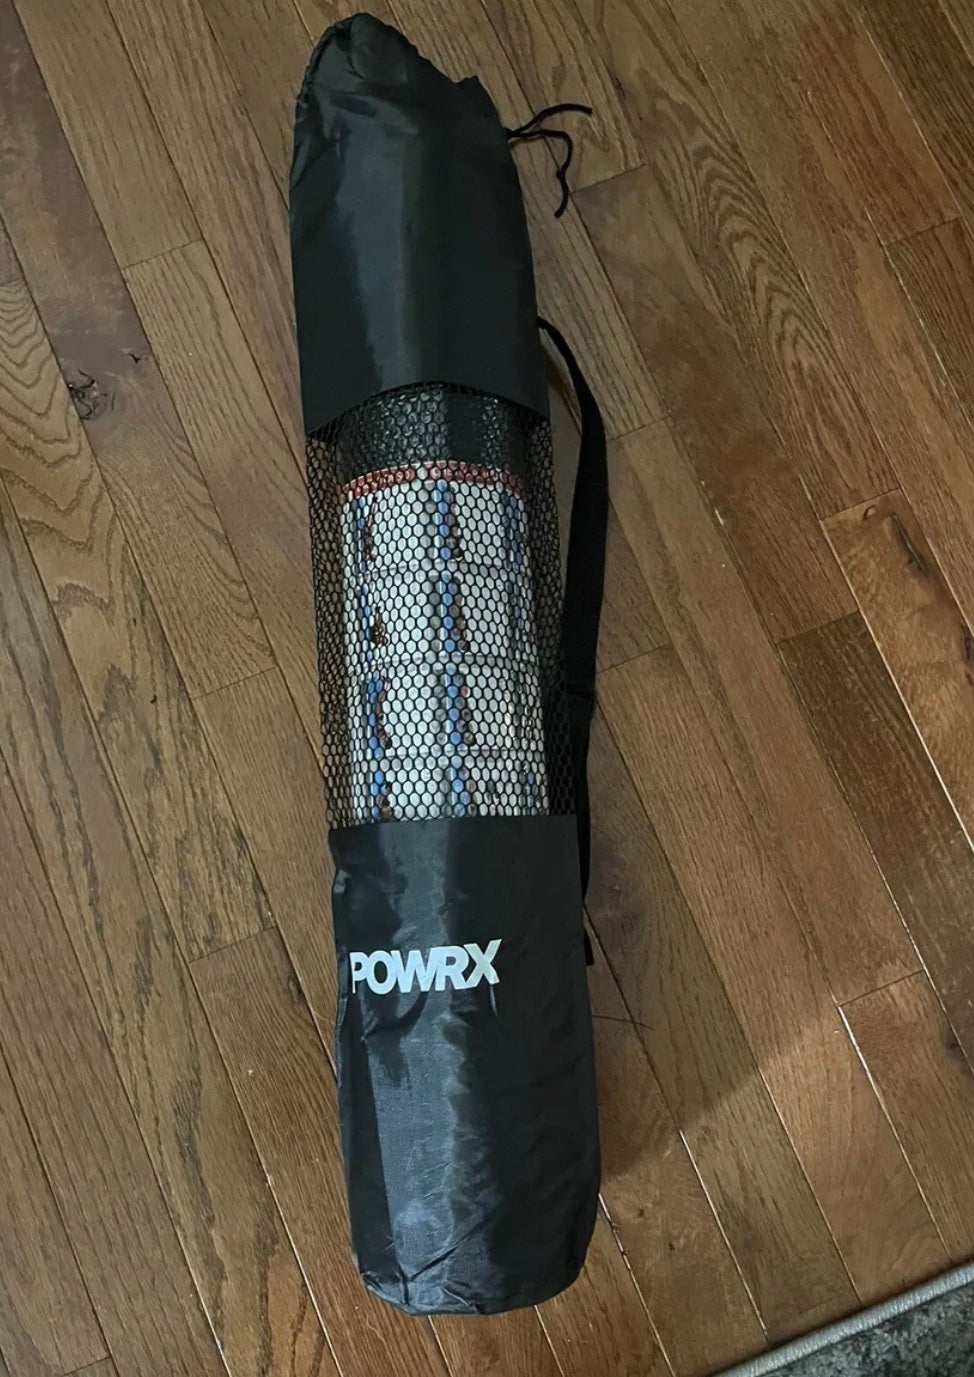 Yoga mat, With Carry Bag, POWRX brand, black, new in box